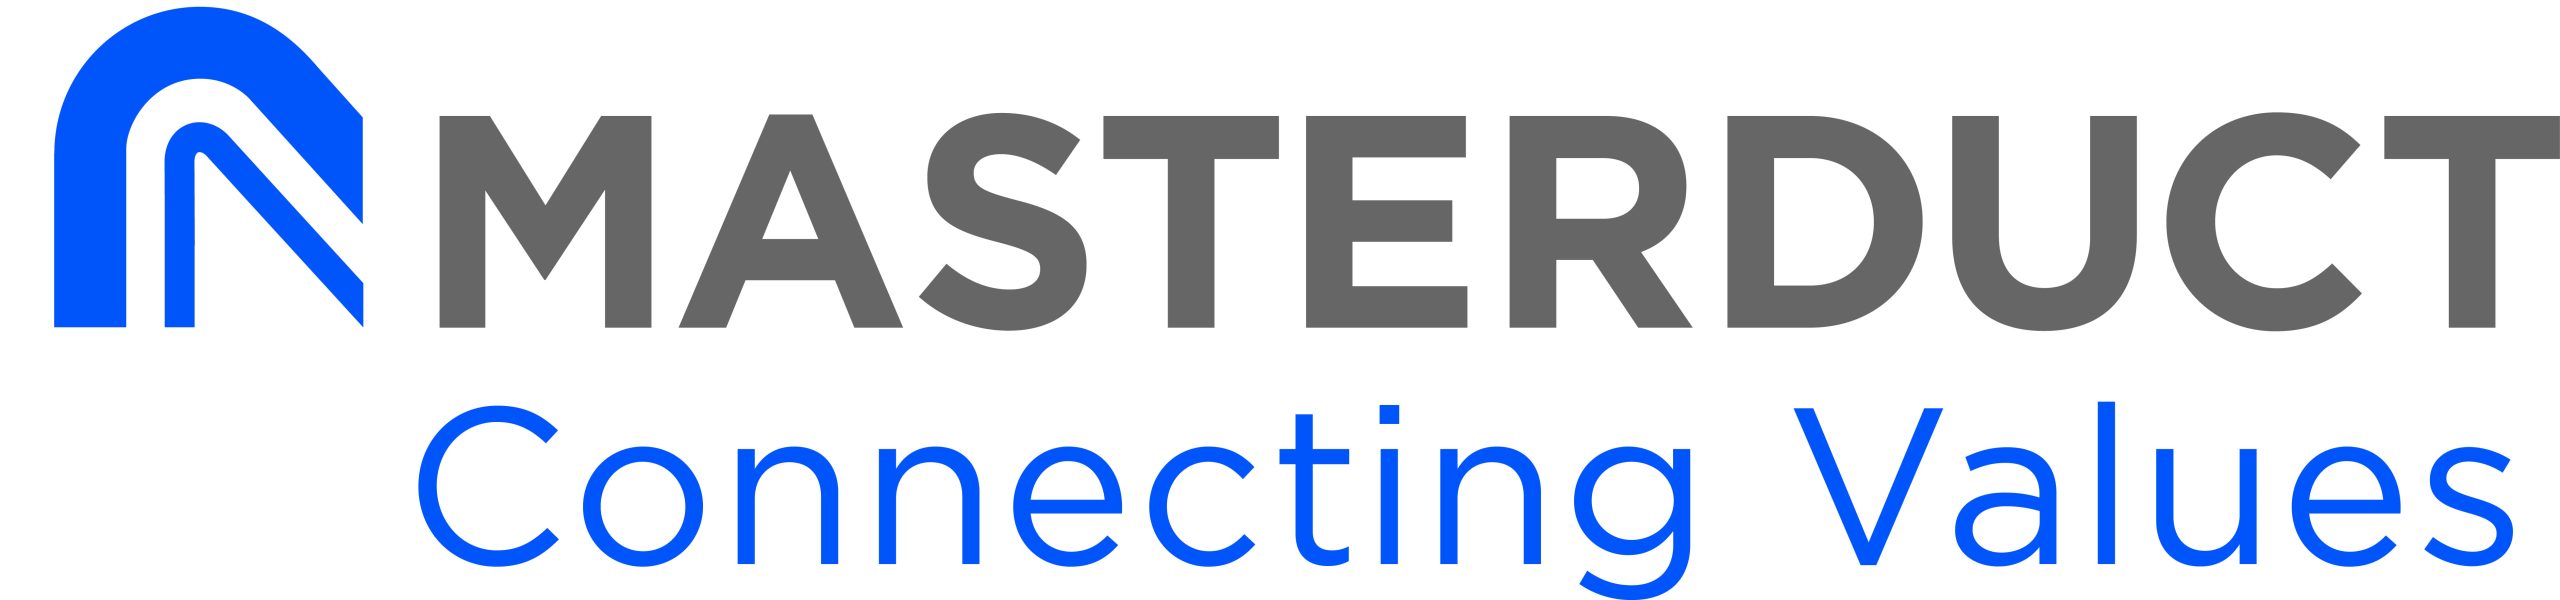 Masterduct Connecting Values